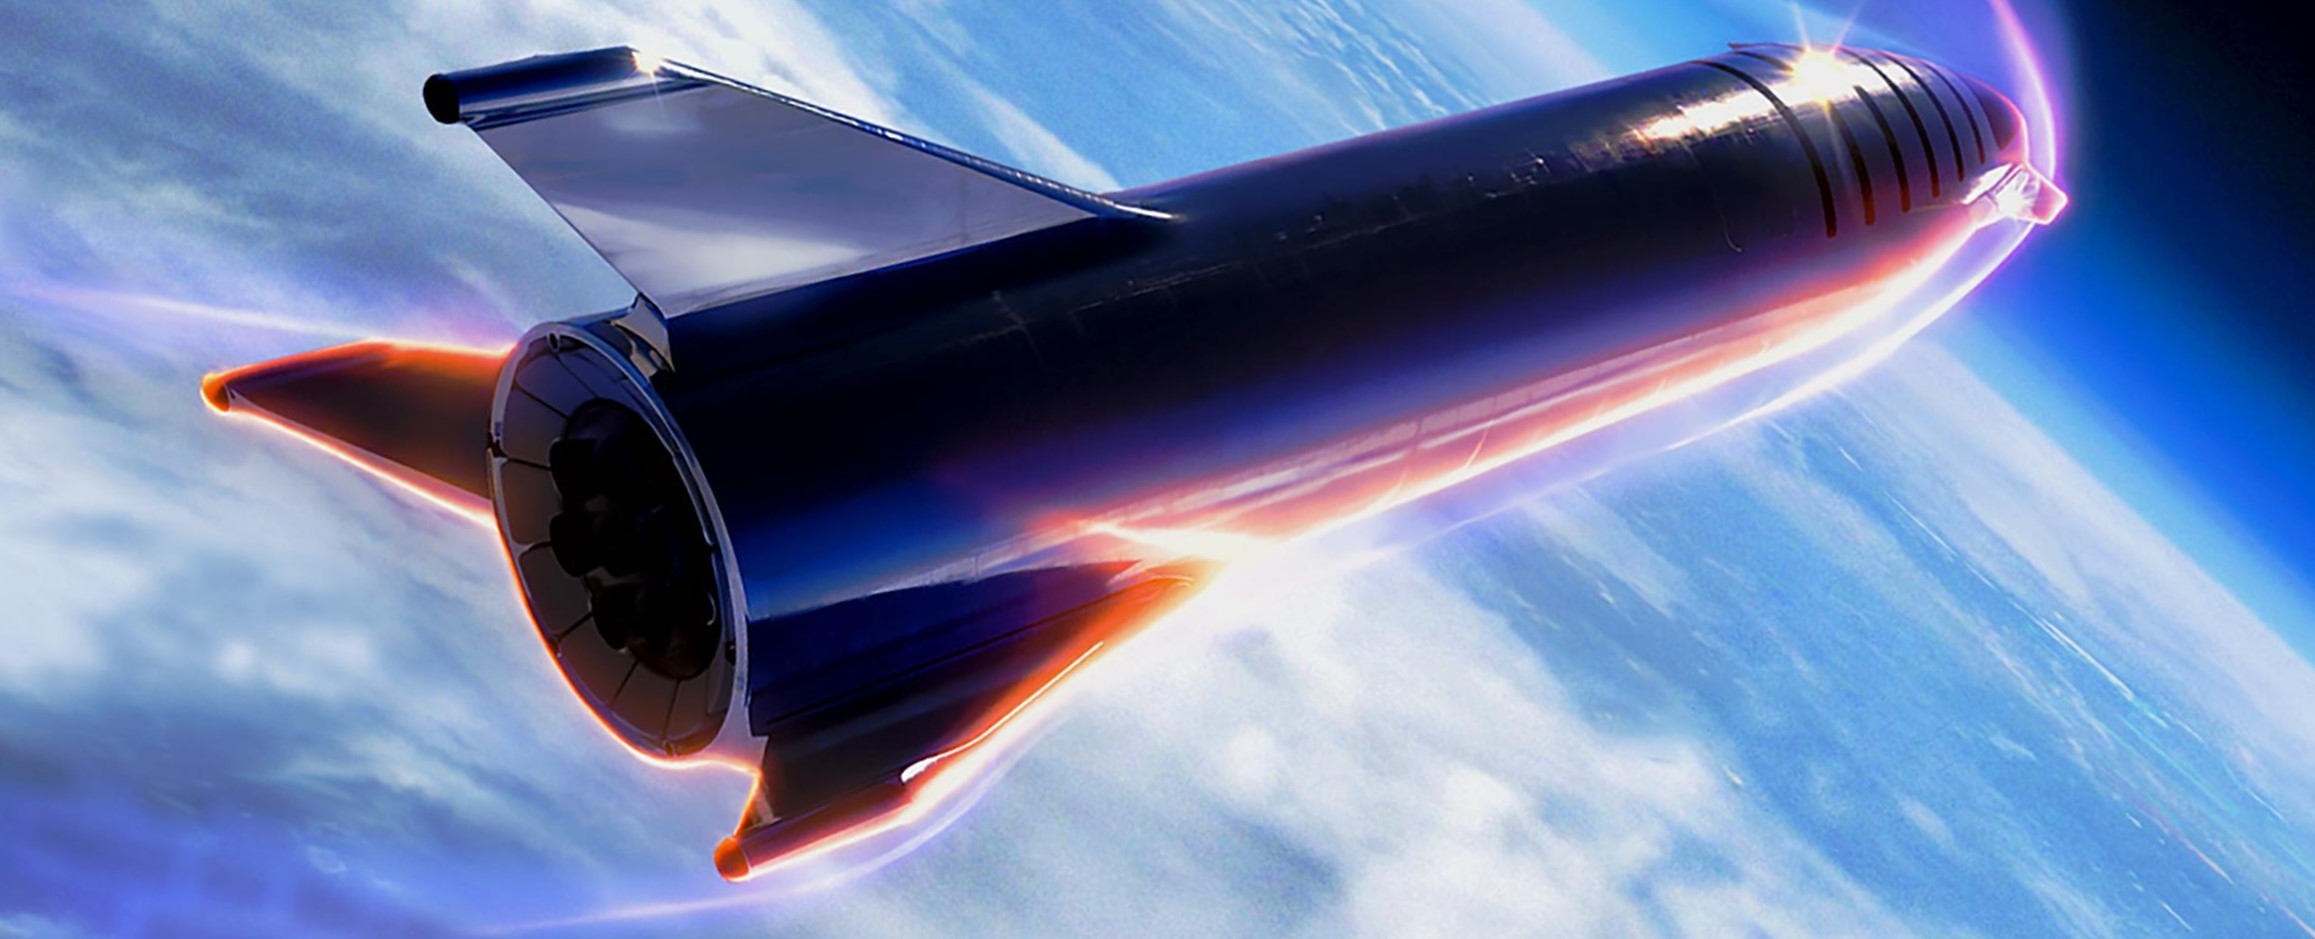 Starship reentry Earth SpaceX) 1 crop 5 edit 2